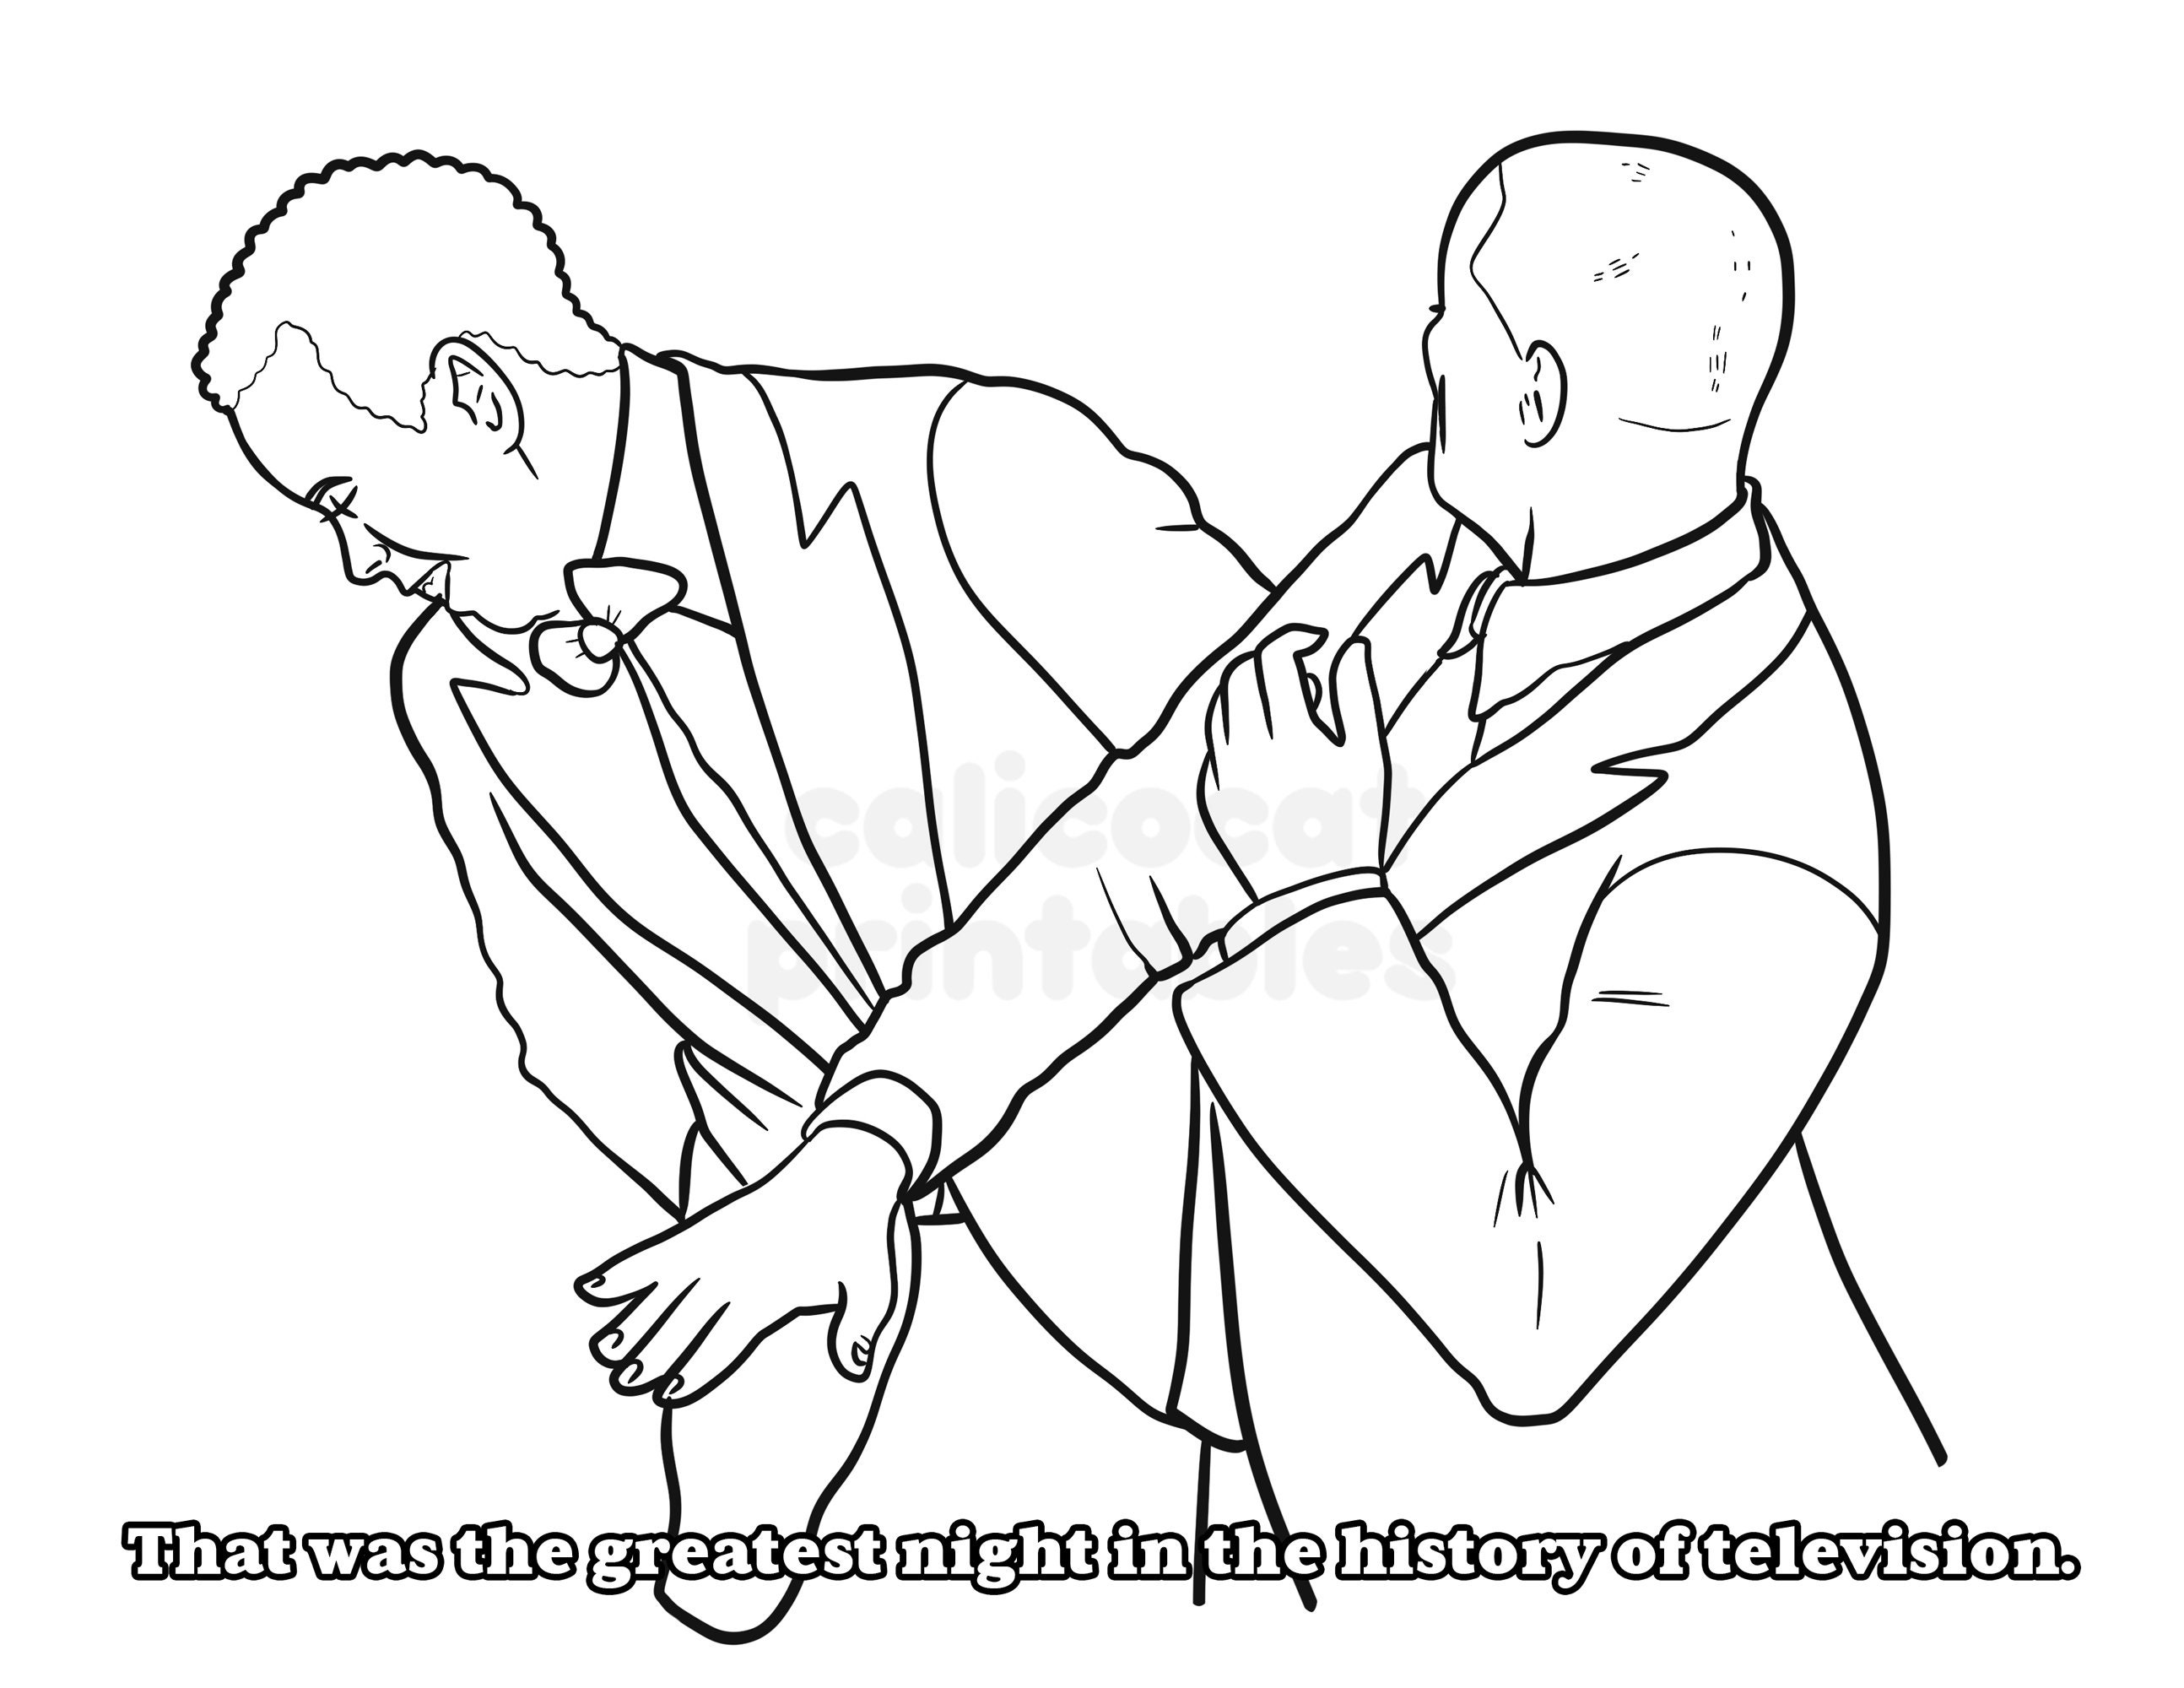 Will Smiths Punching Chris Rock Oscars 2022 Coloring Book - Etsy